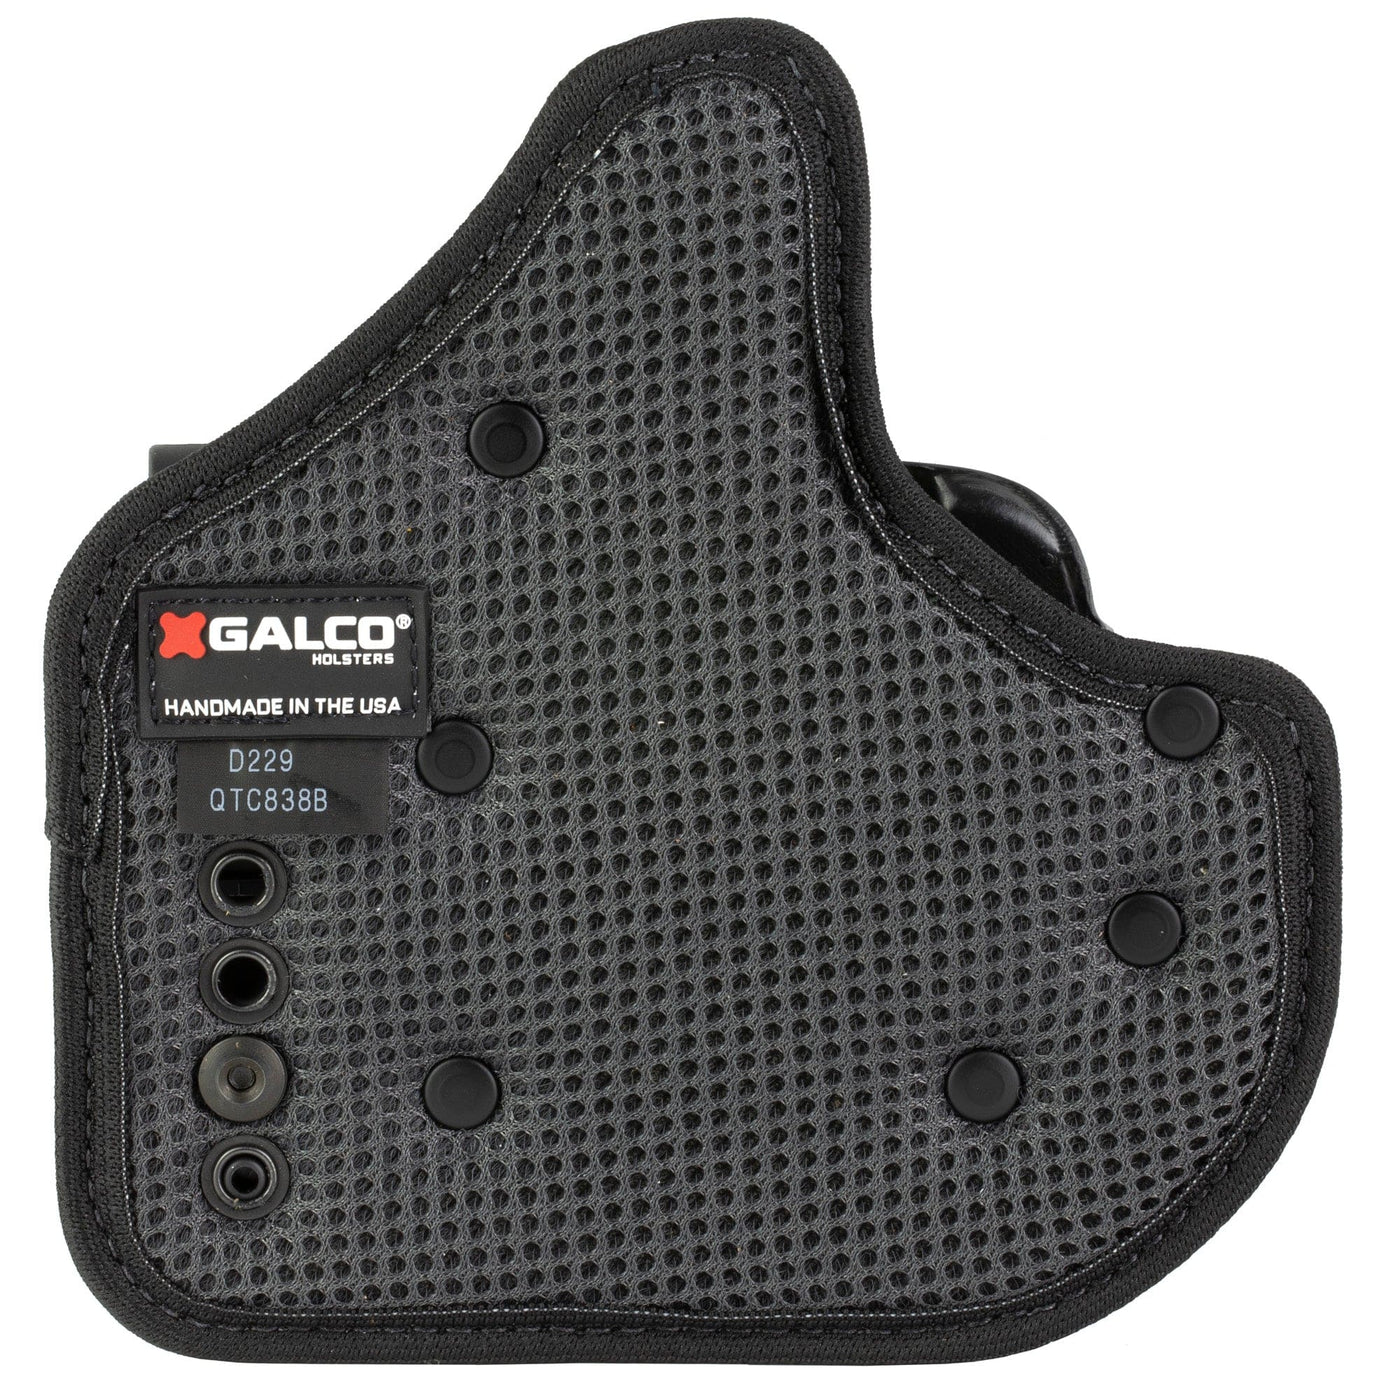 Galco Galco Quicktuk Cld Iwb P365xl Rh Blk Holsters